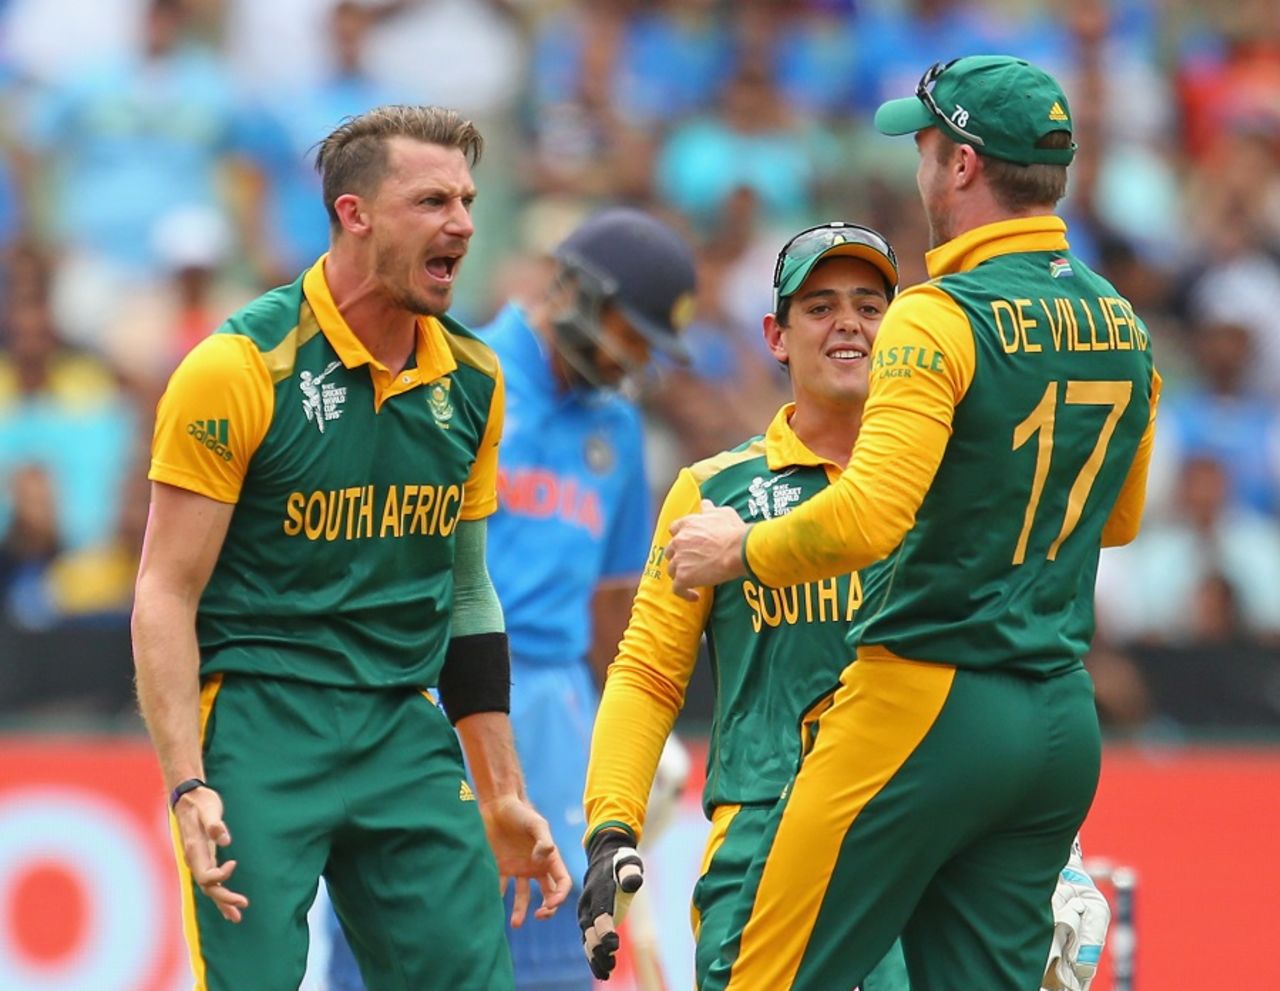 South Africa celebrate after AB de Villiers runs out Rohit Sharma for a duck, India v South Africa, World Cup 2015, Group B, Melbourne, February 22, 2015